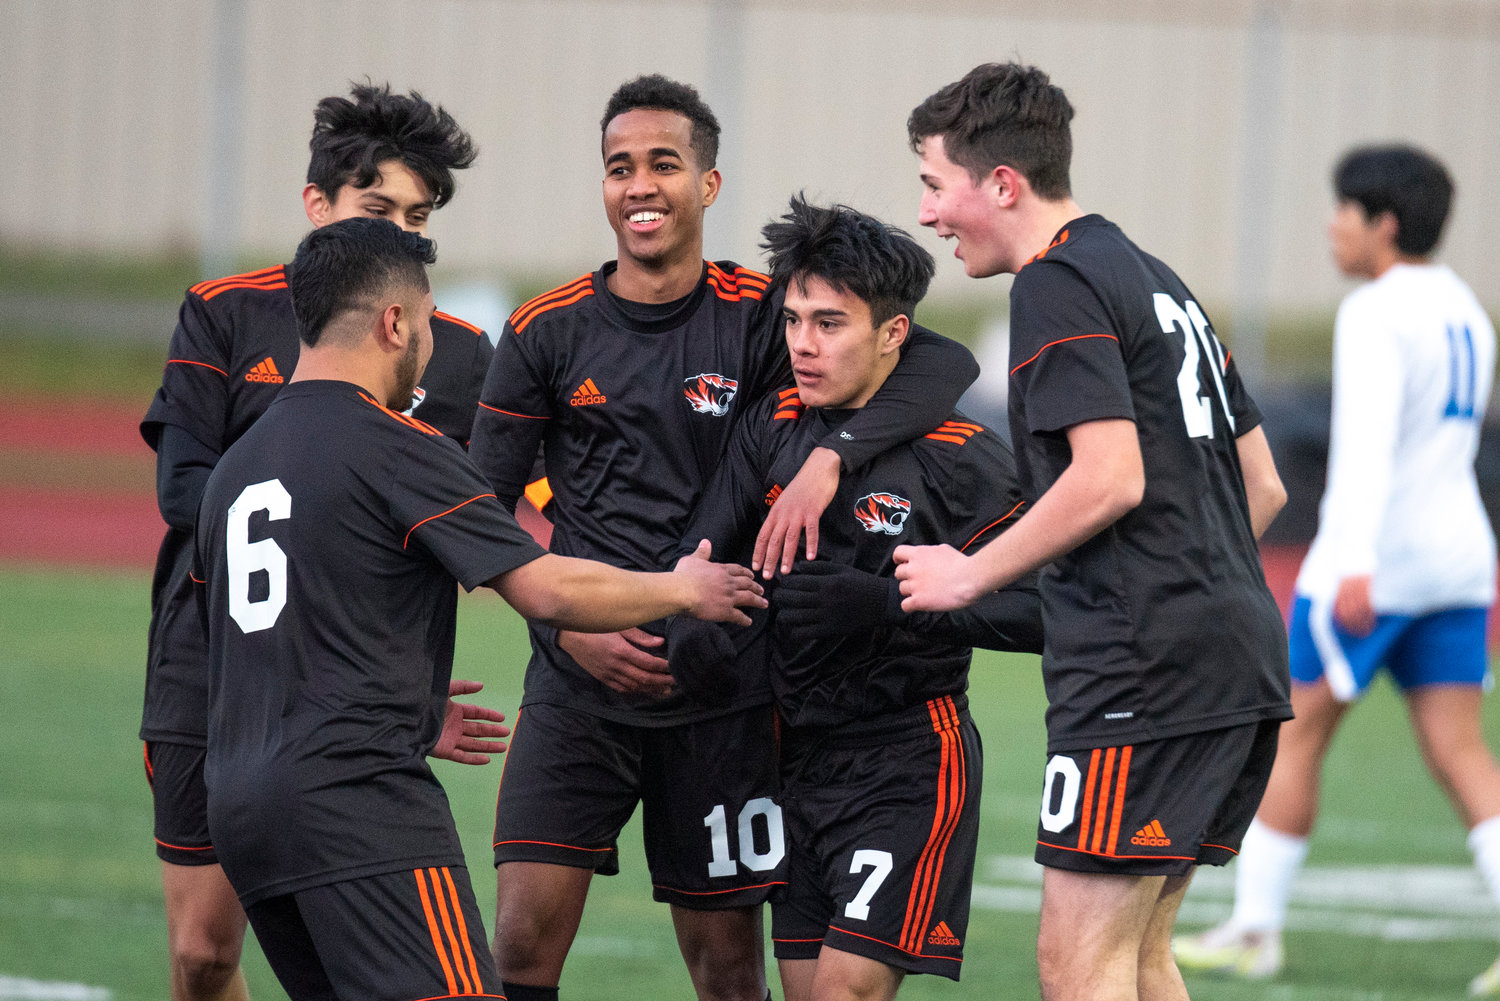 Centralia players celebrate Kilmer Alverto-Gabarrette's goal against Rochester in the 3rd minute during a home game on Tuesday, April 12.